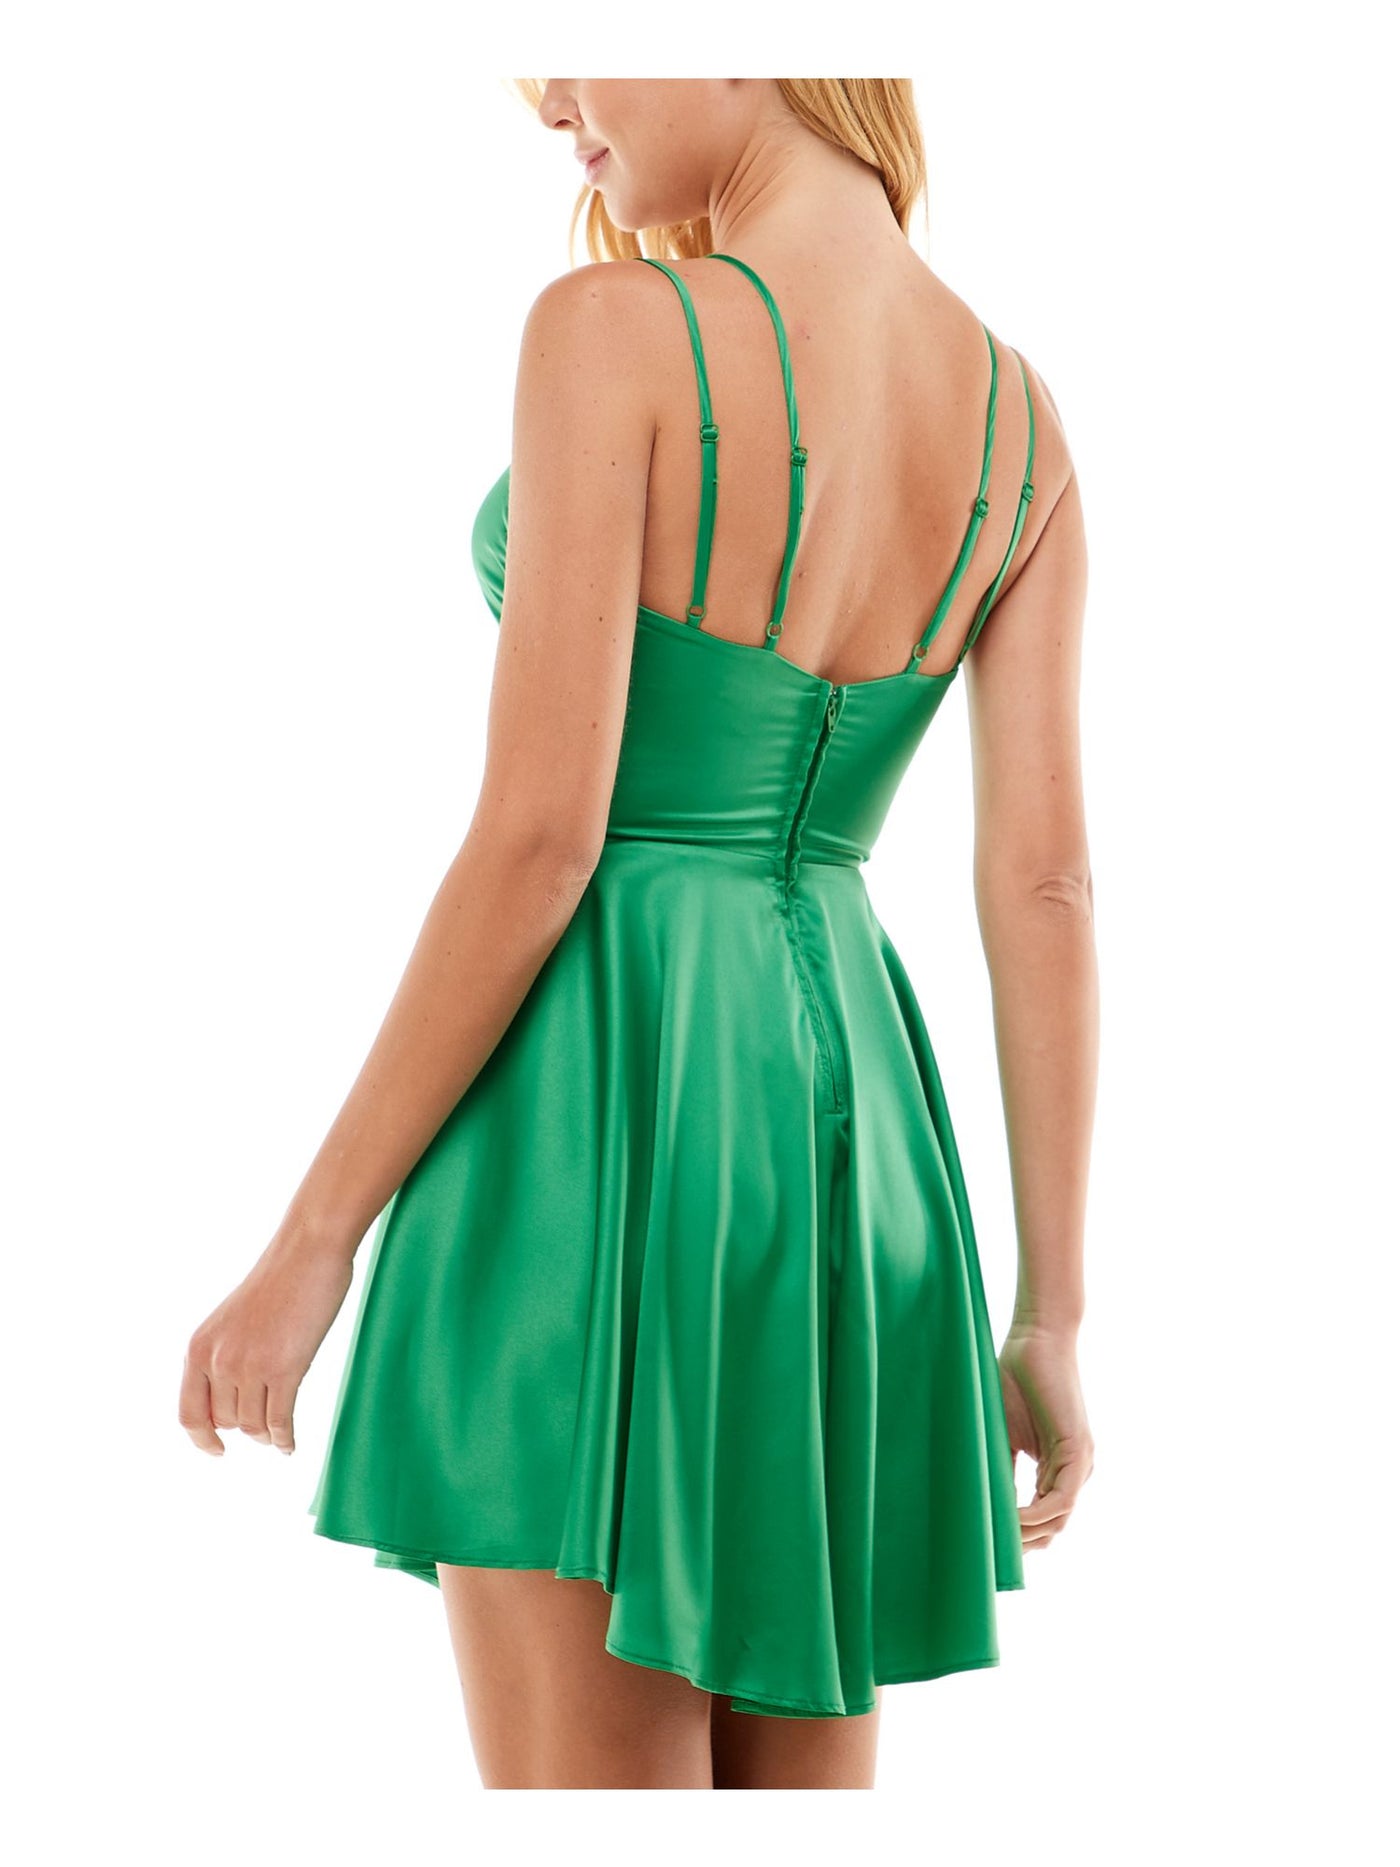 CITY STUDIO Womens Green Satin Zippered Unlined Strappy Molded Cups Spaghetti Strap V Neck Short Party Fit + Flare Dress Juniors 7